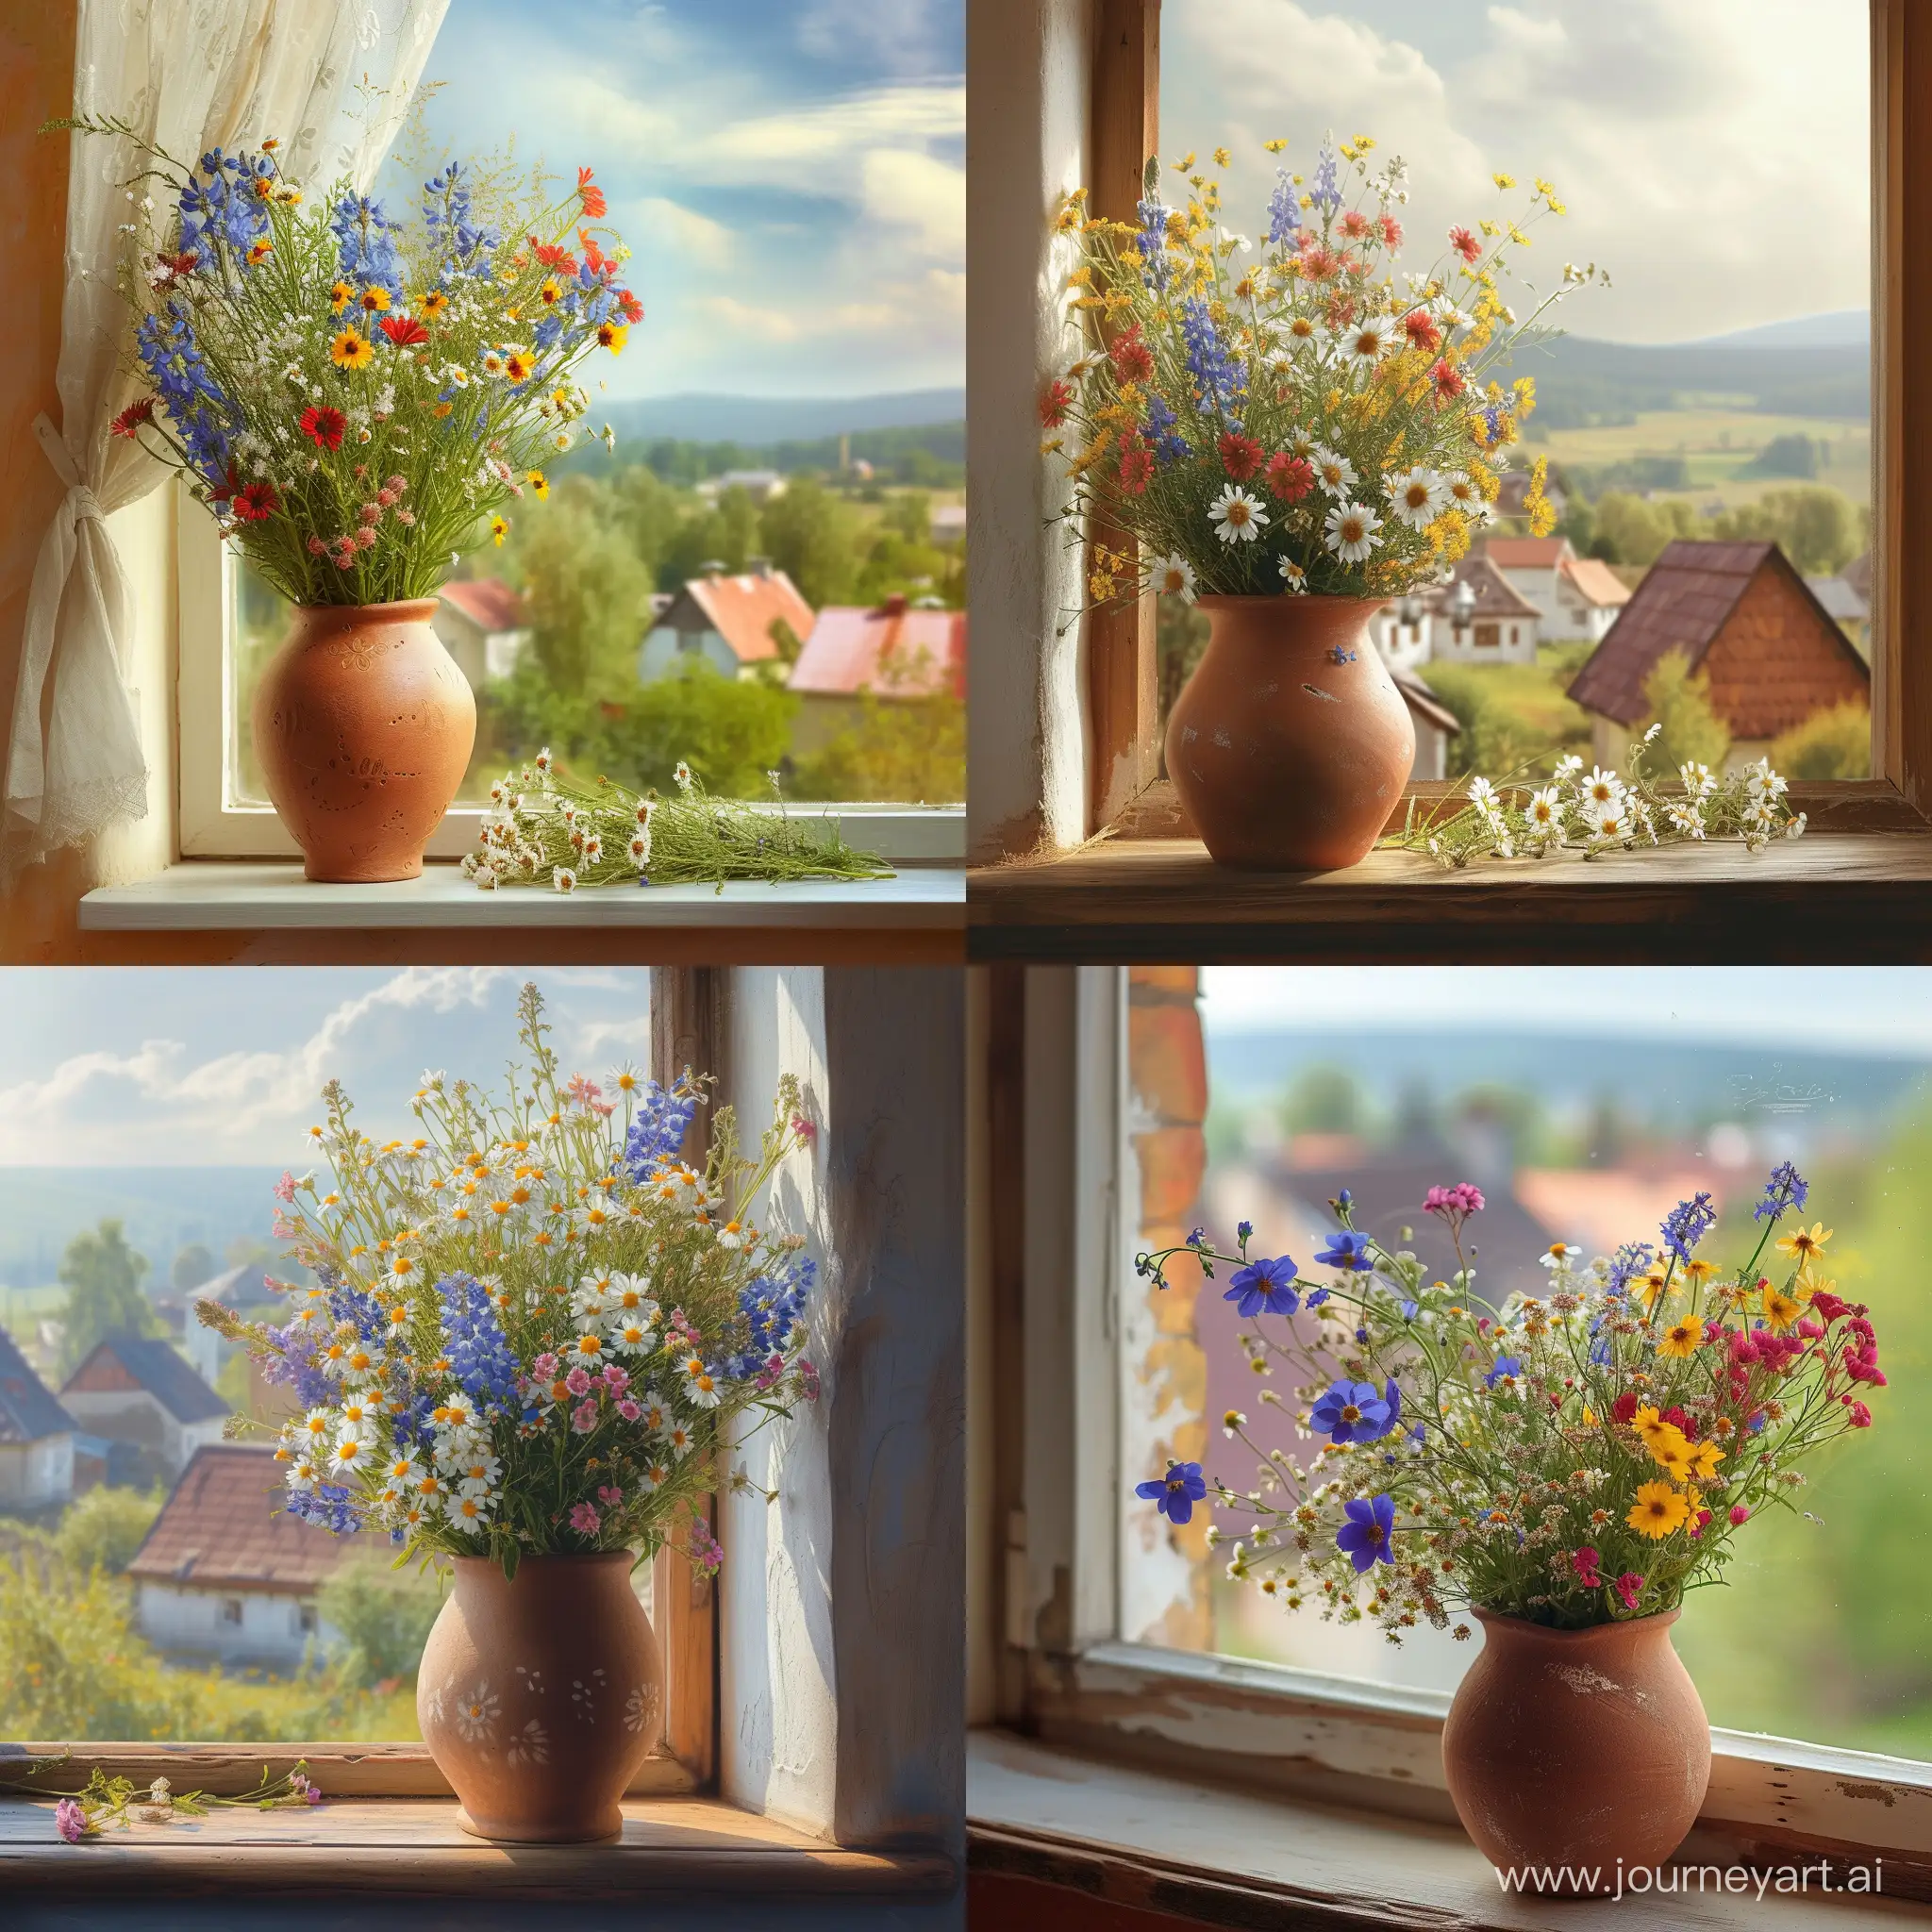 Charming-Village-View-Through-Window-with-Wildflowers-in-Clay-Vase